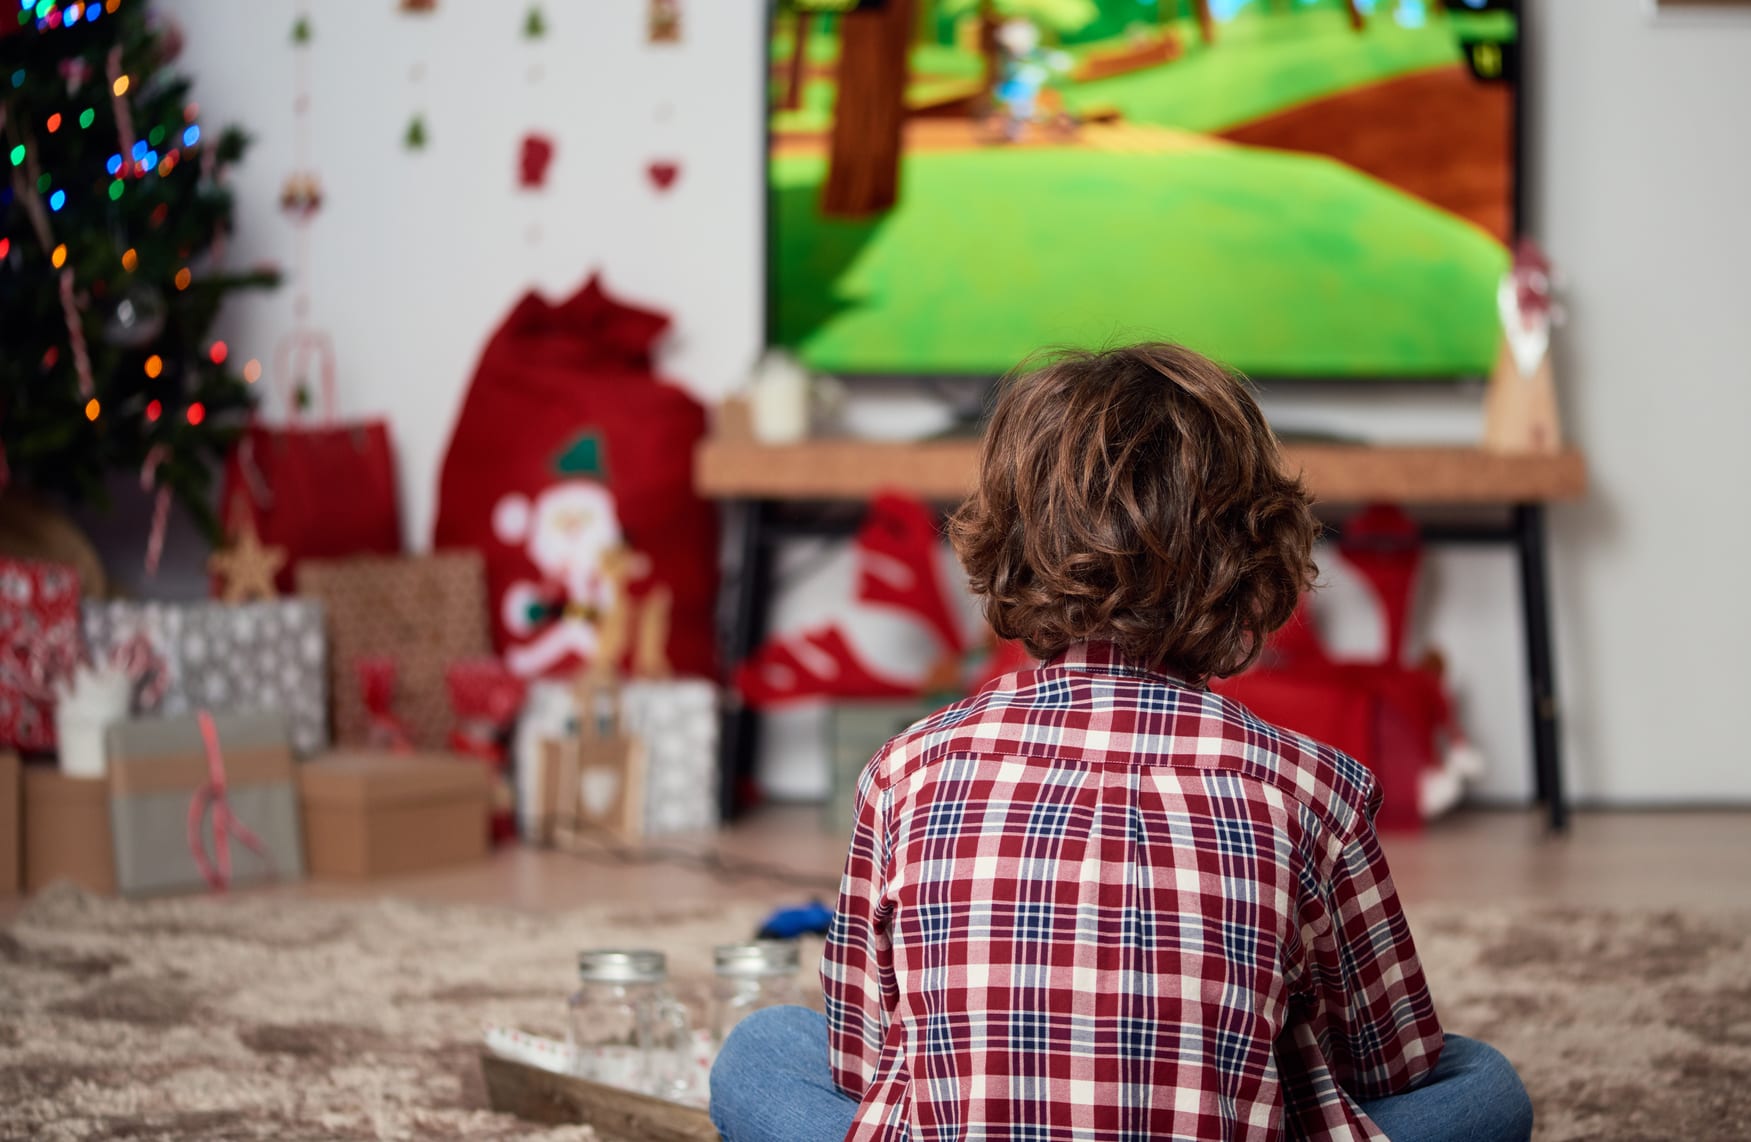 Back view of child with curly hair playing video game on TV.